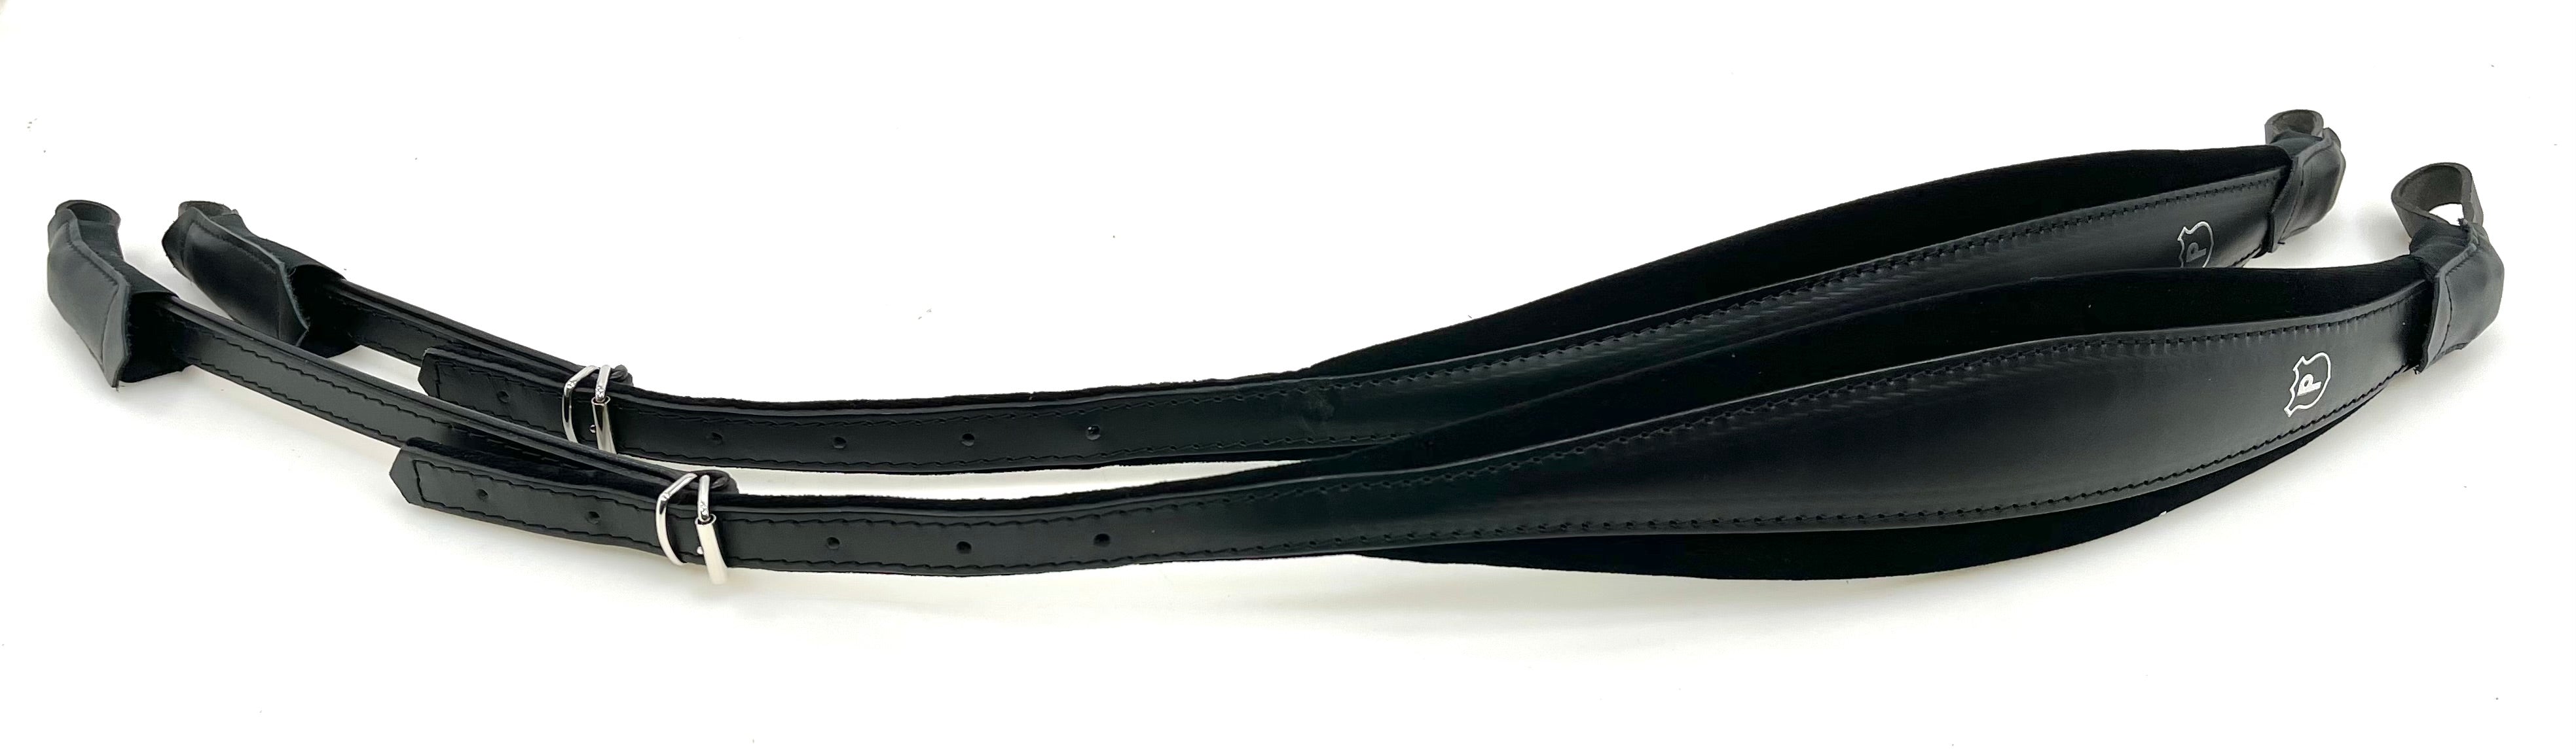 Black Leather/Nylon Strap Buckle Covers